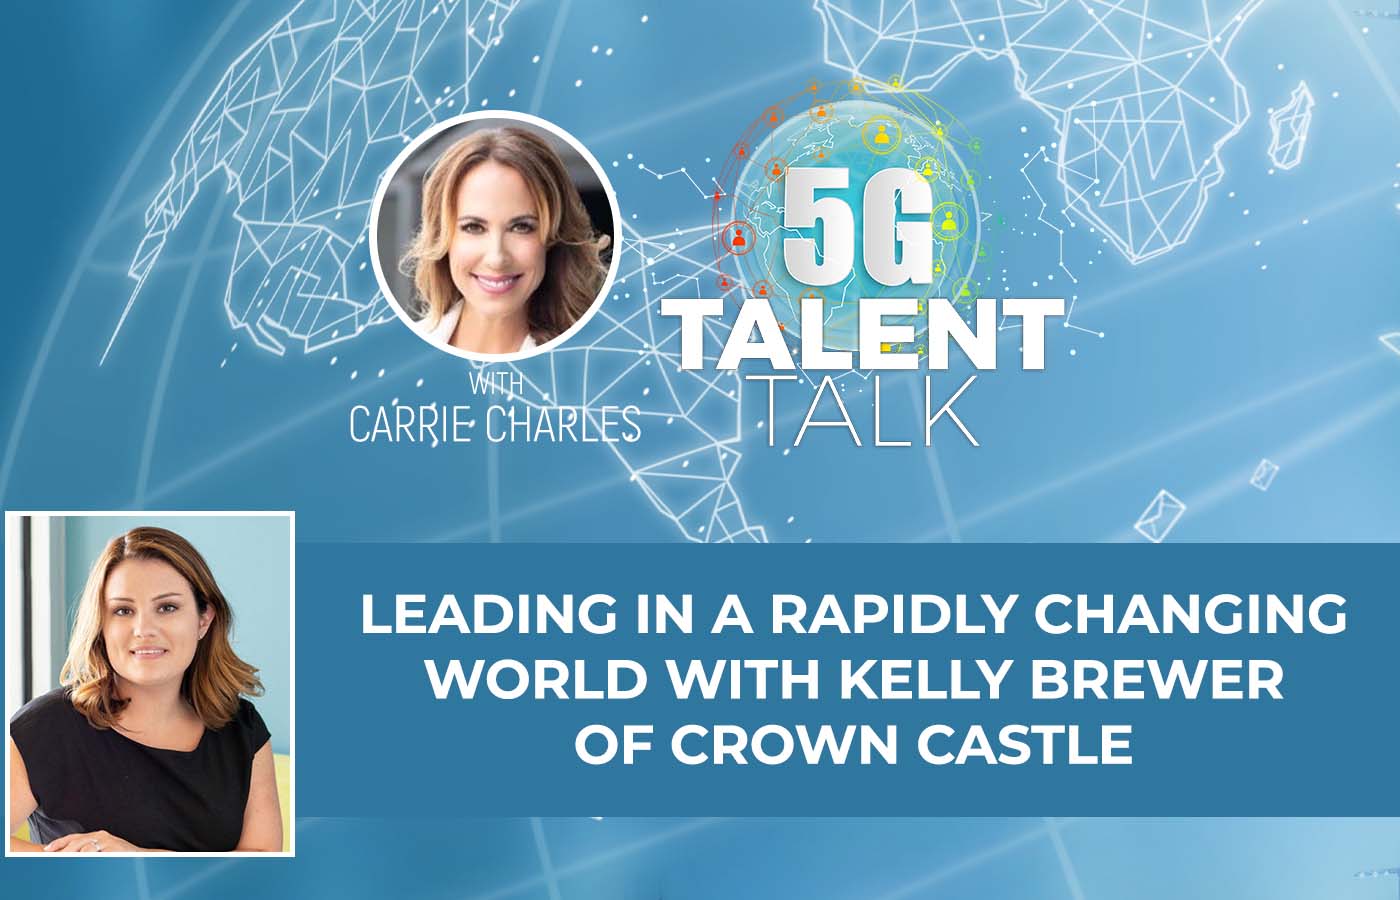 Leading in a Rapidly Changing World with Kelly Brewer of Crown Castle